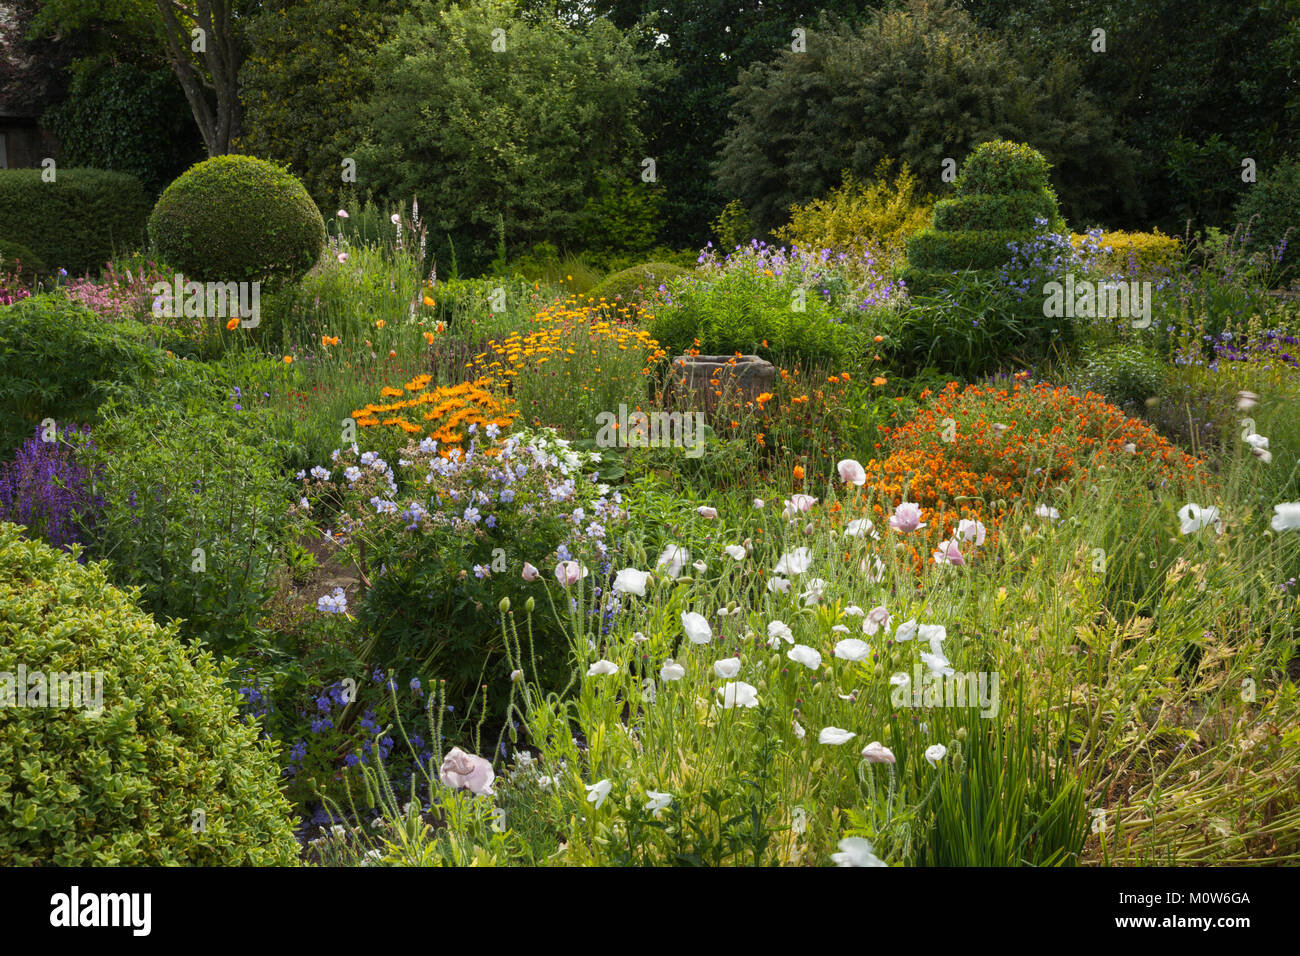 Colourful herbaceous flowers grow informally among topiary spheres and spirals in the flower garden of Herterton House, Northumberland, England. Stock Photo